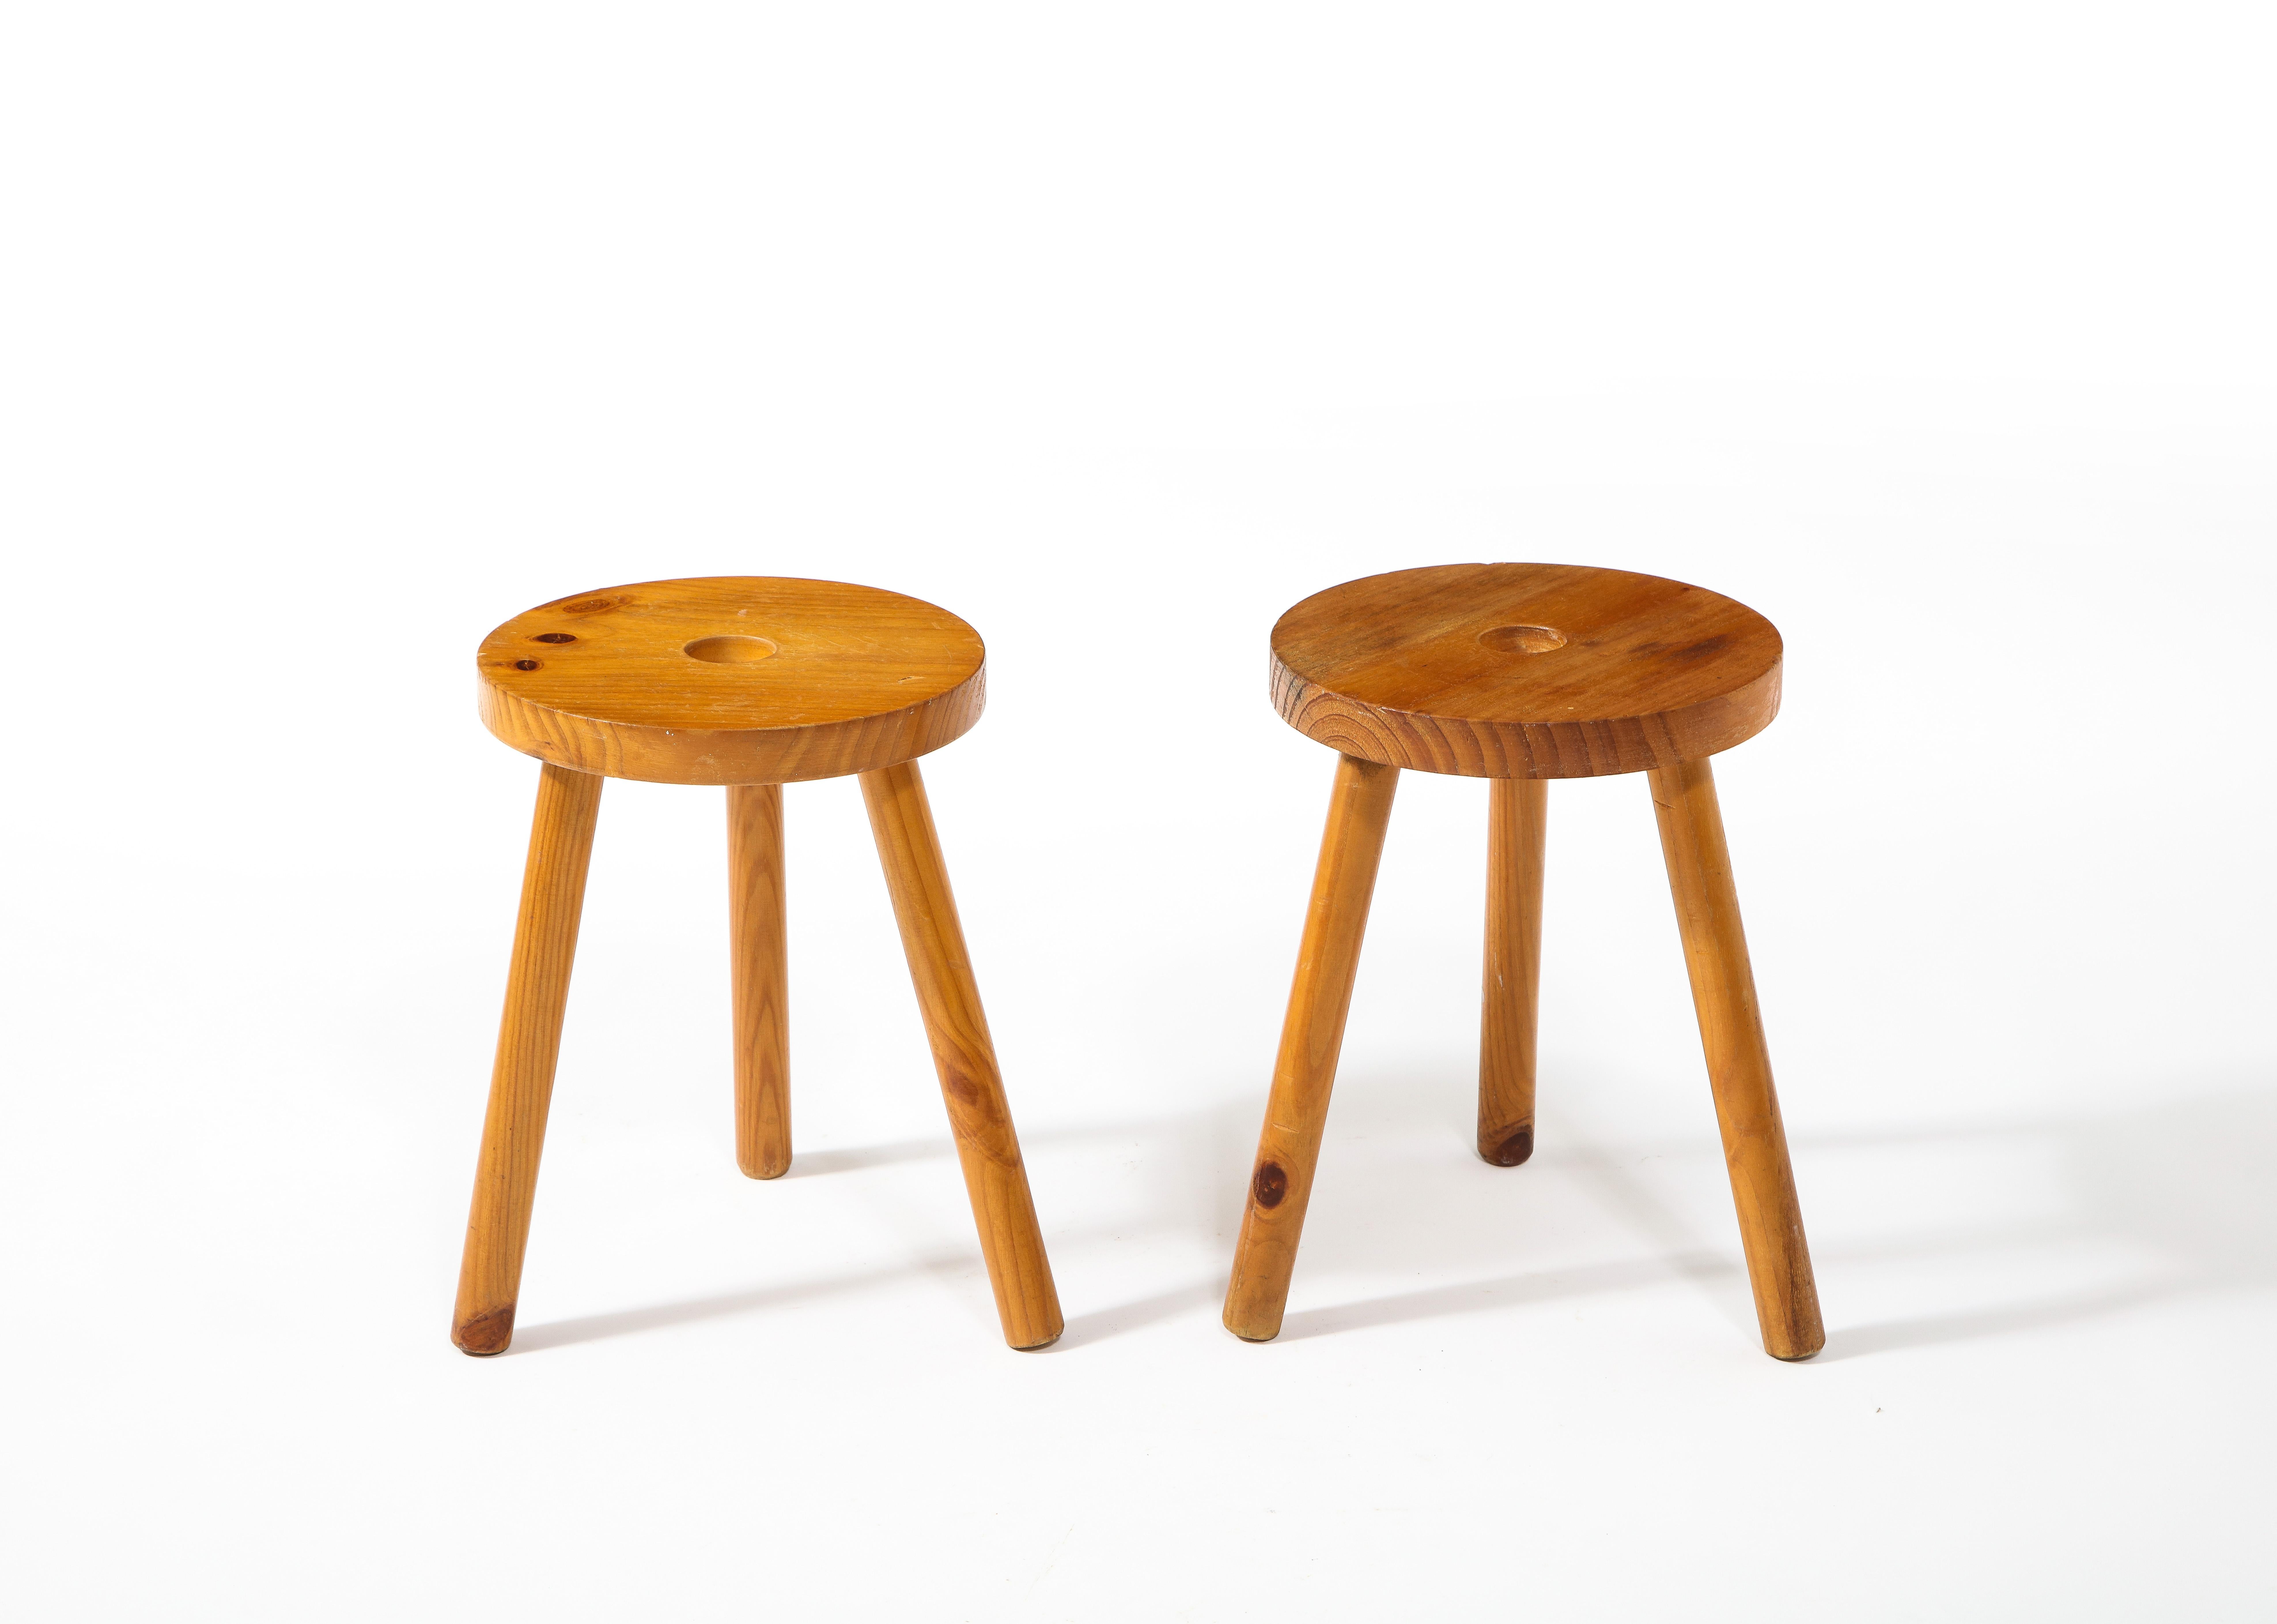 Rustic Pair of Round Pine Stools, France 1960's For Sale